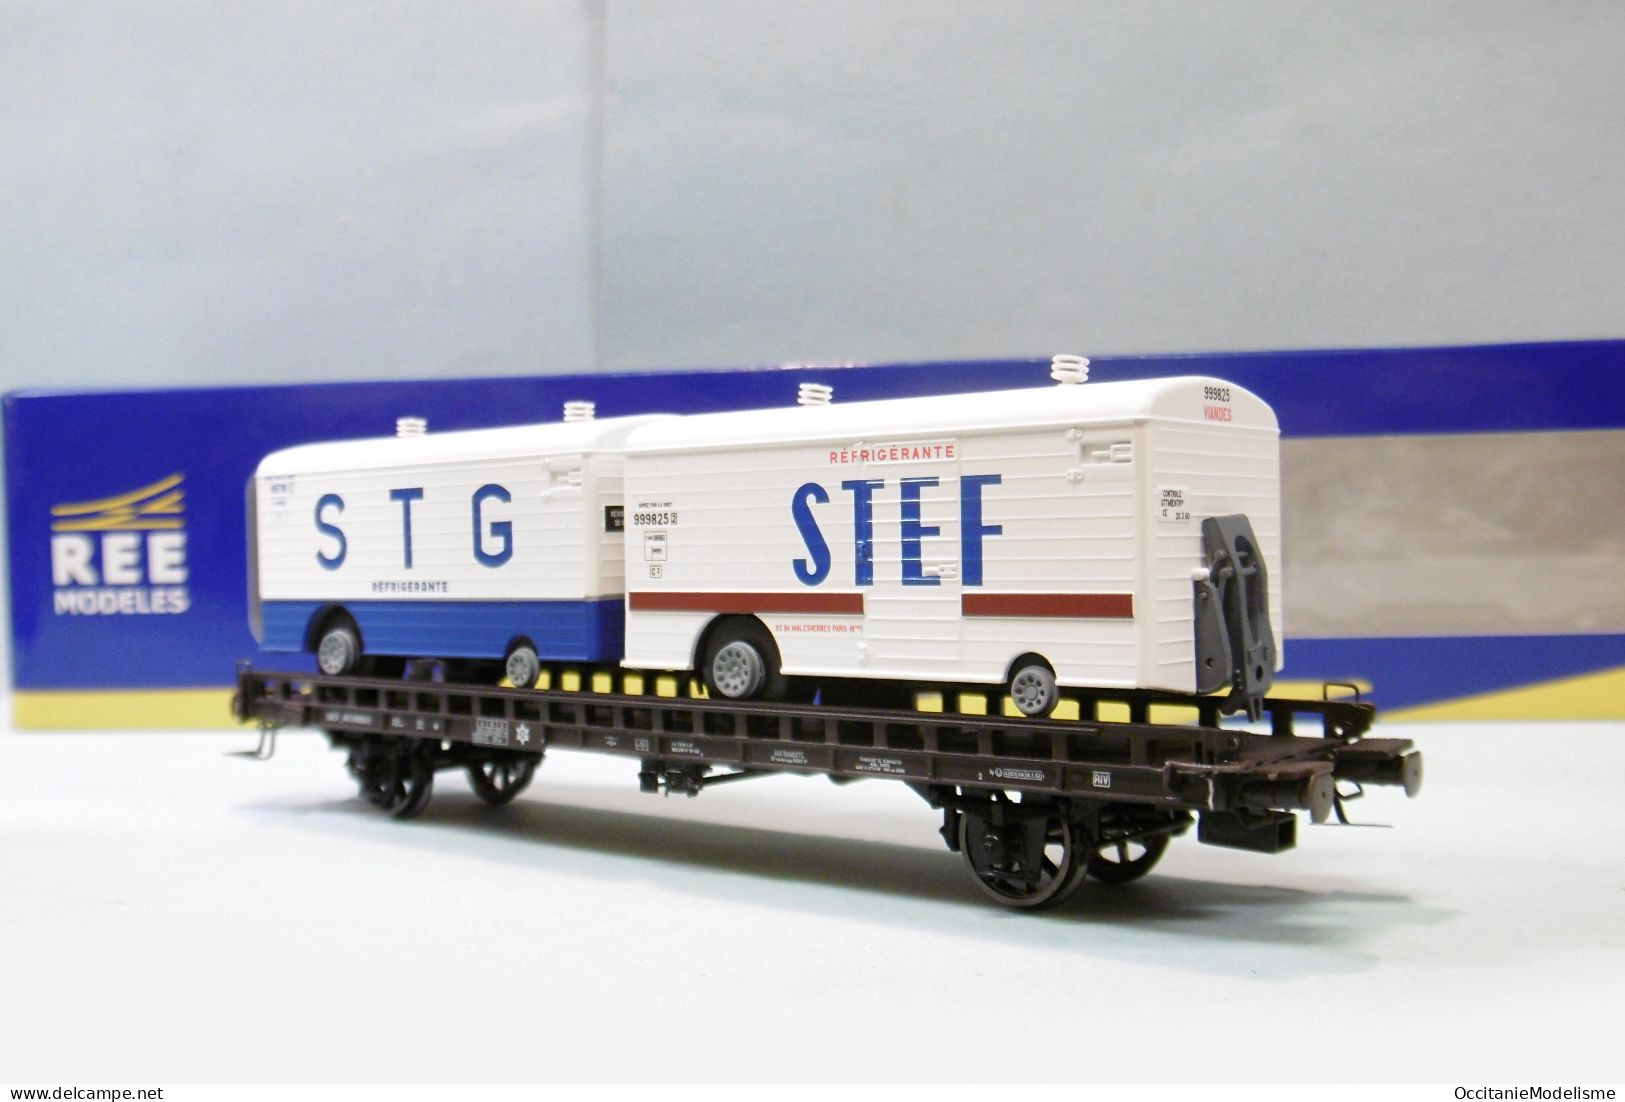 REE - WAGON UFR Biporteur STEF STG SNCF Ep. III Réf. WB-635 Neuf NBO HO 1/87 - Goods Waggons (wagons)